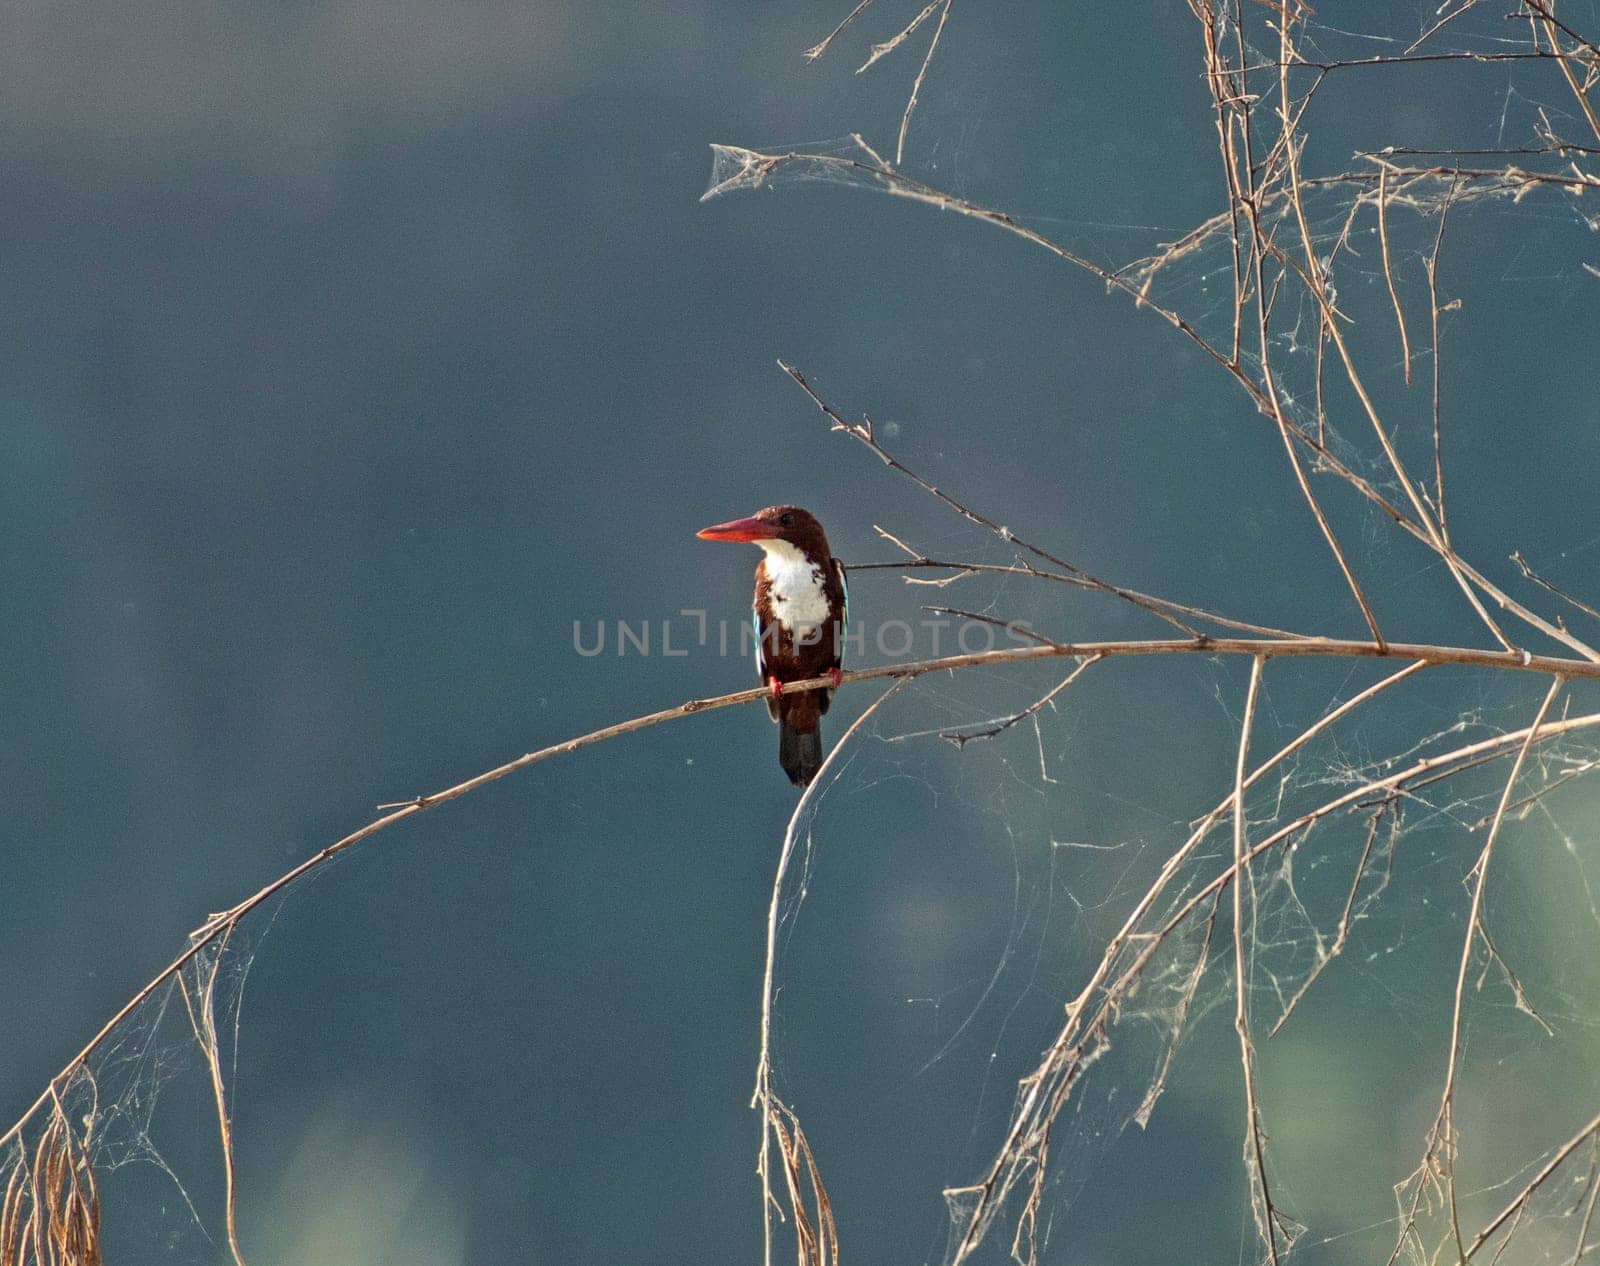 White-throated kingfisher perched on tree branch by paulvinten